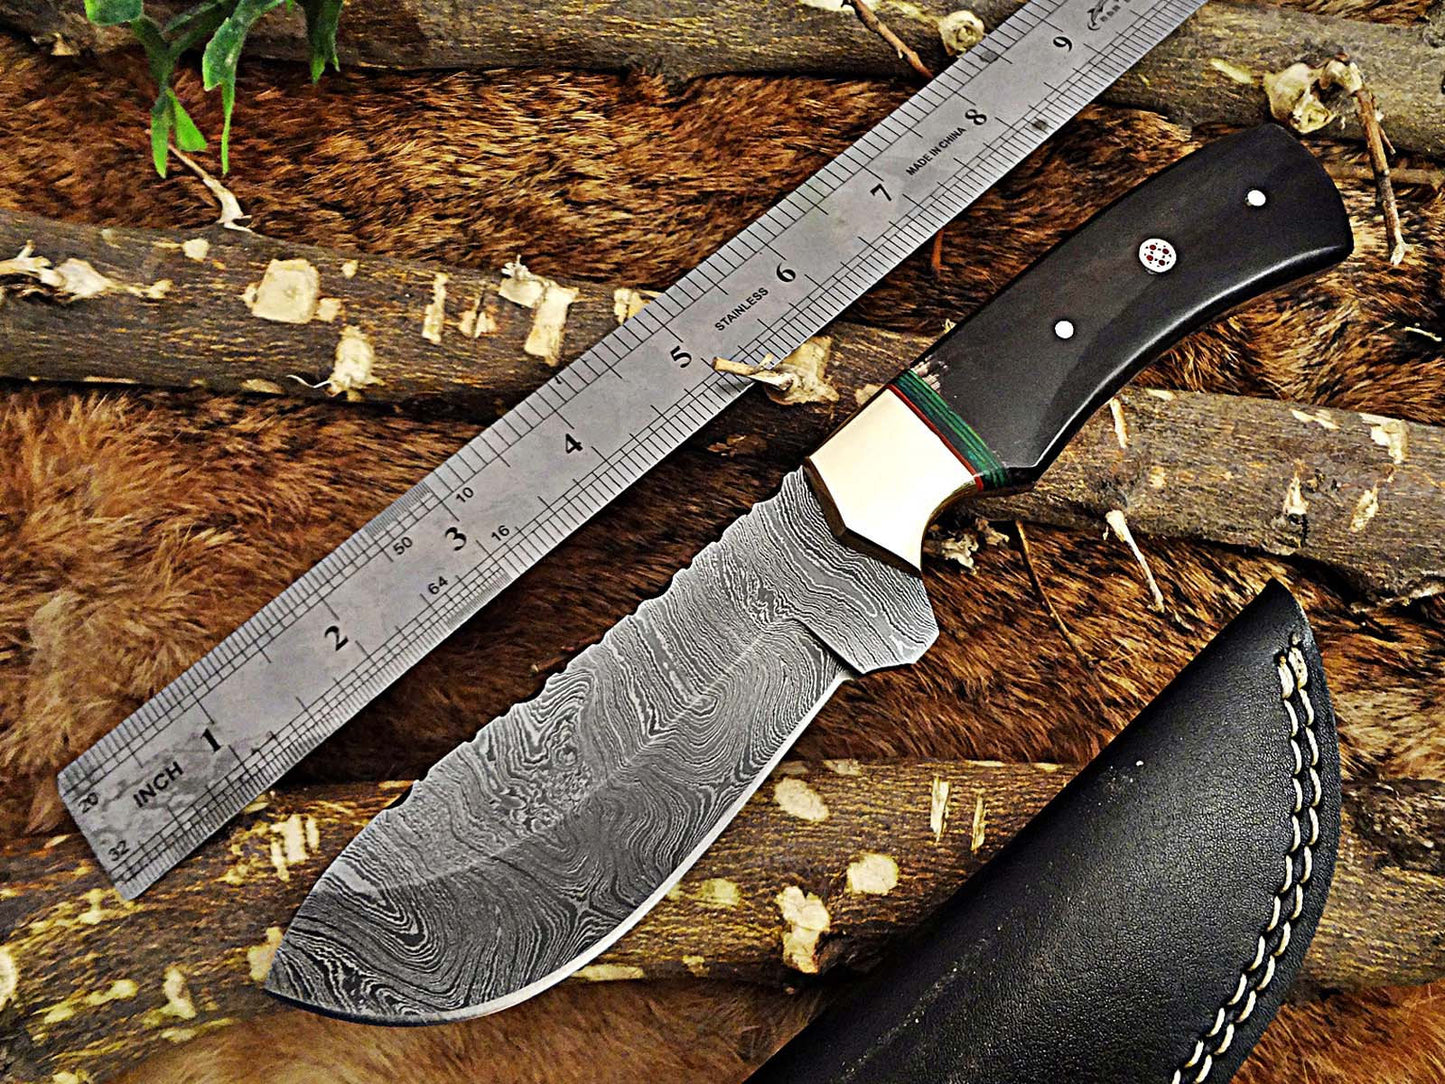 9" Damascus steel full tang Skinning Knife, Black and white scales with Brass Bolster scale, Cow hide Leather sheath included